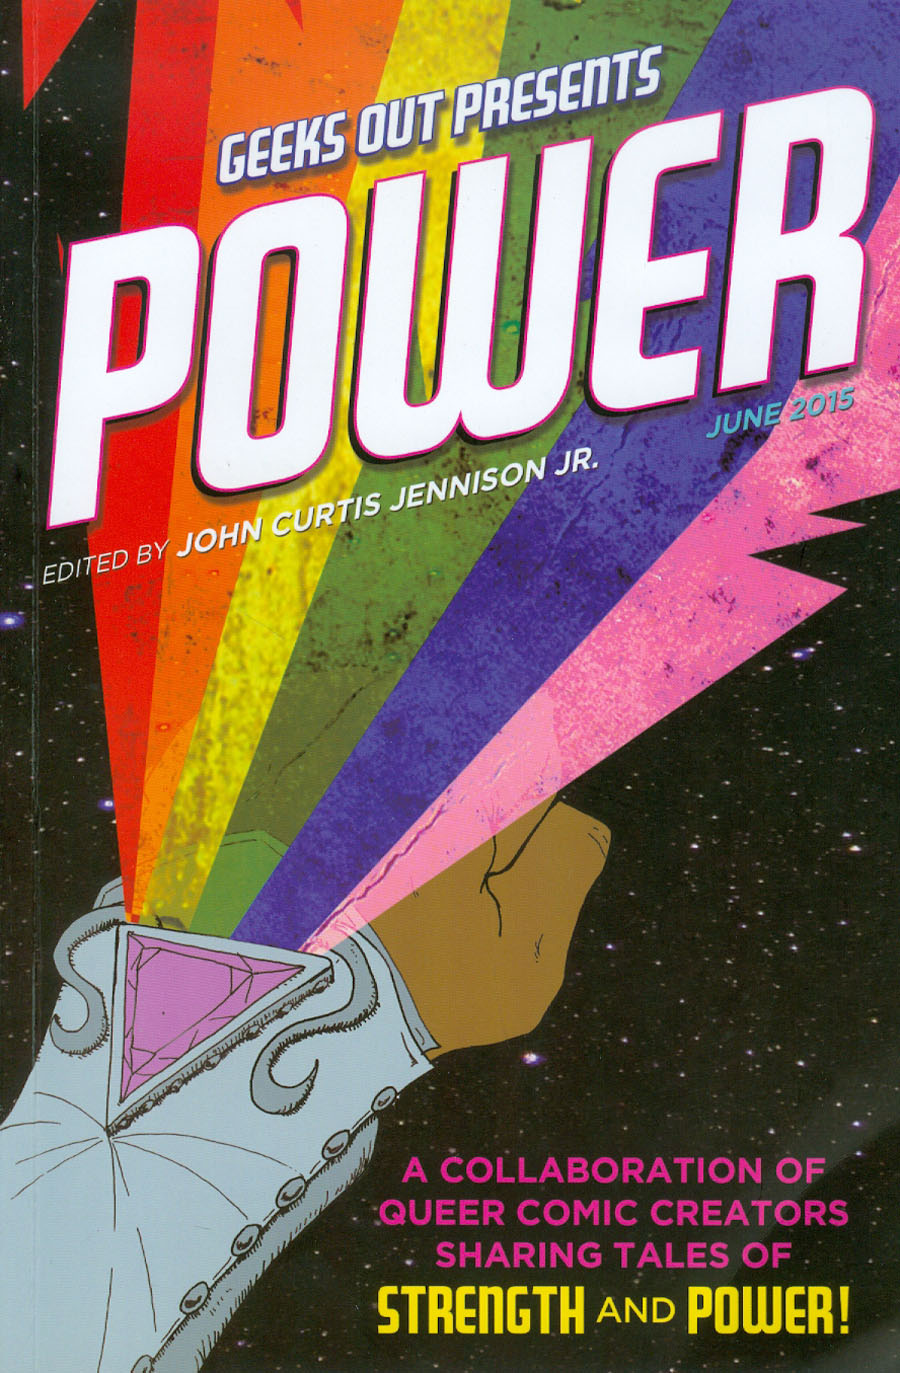 Geeks Out Presents Power TP